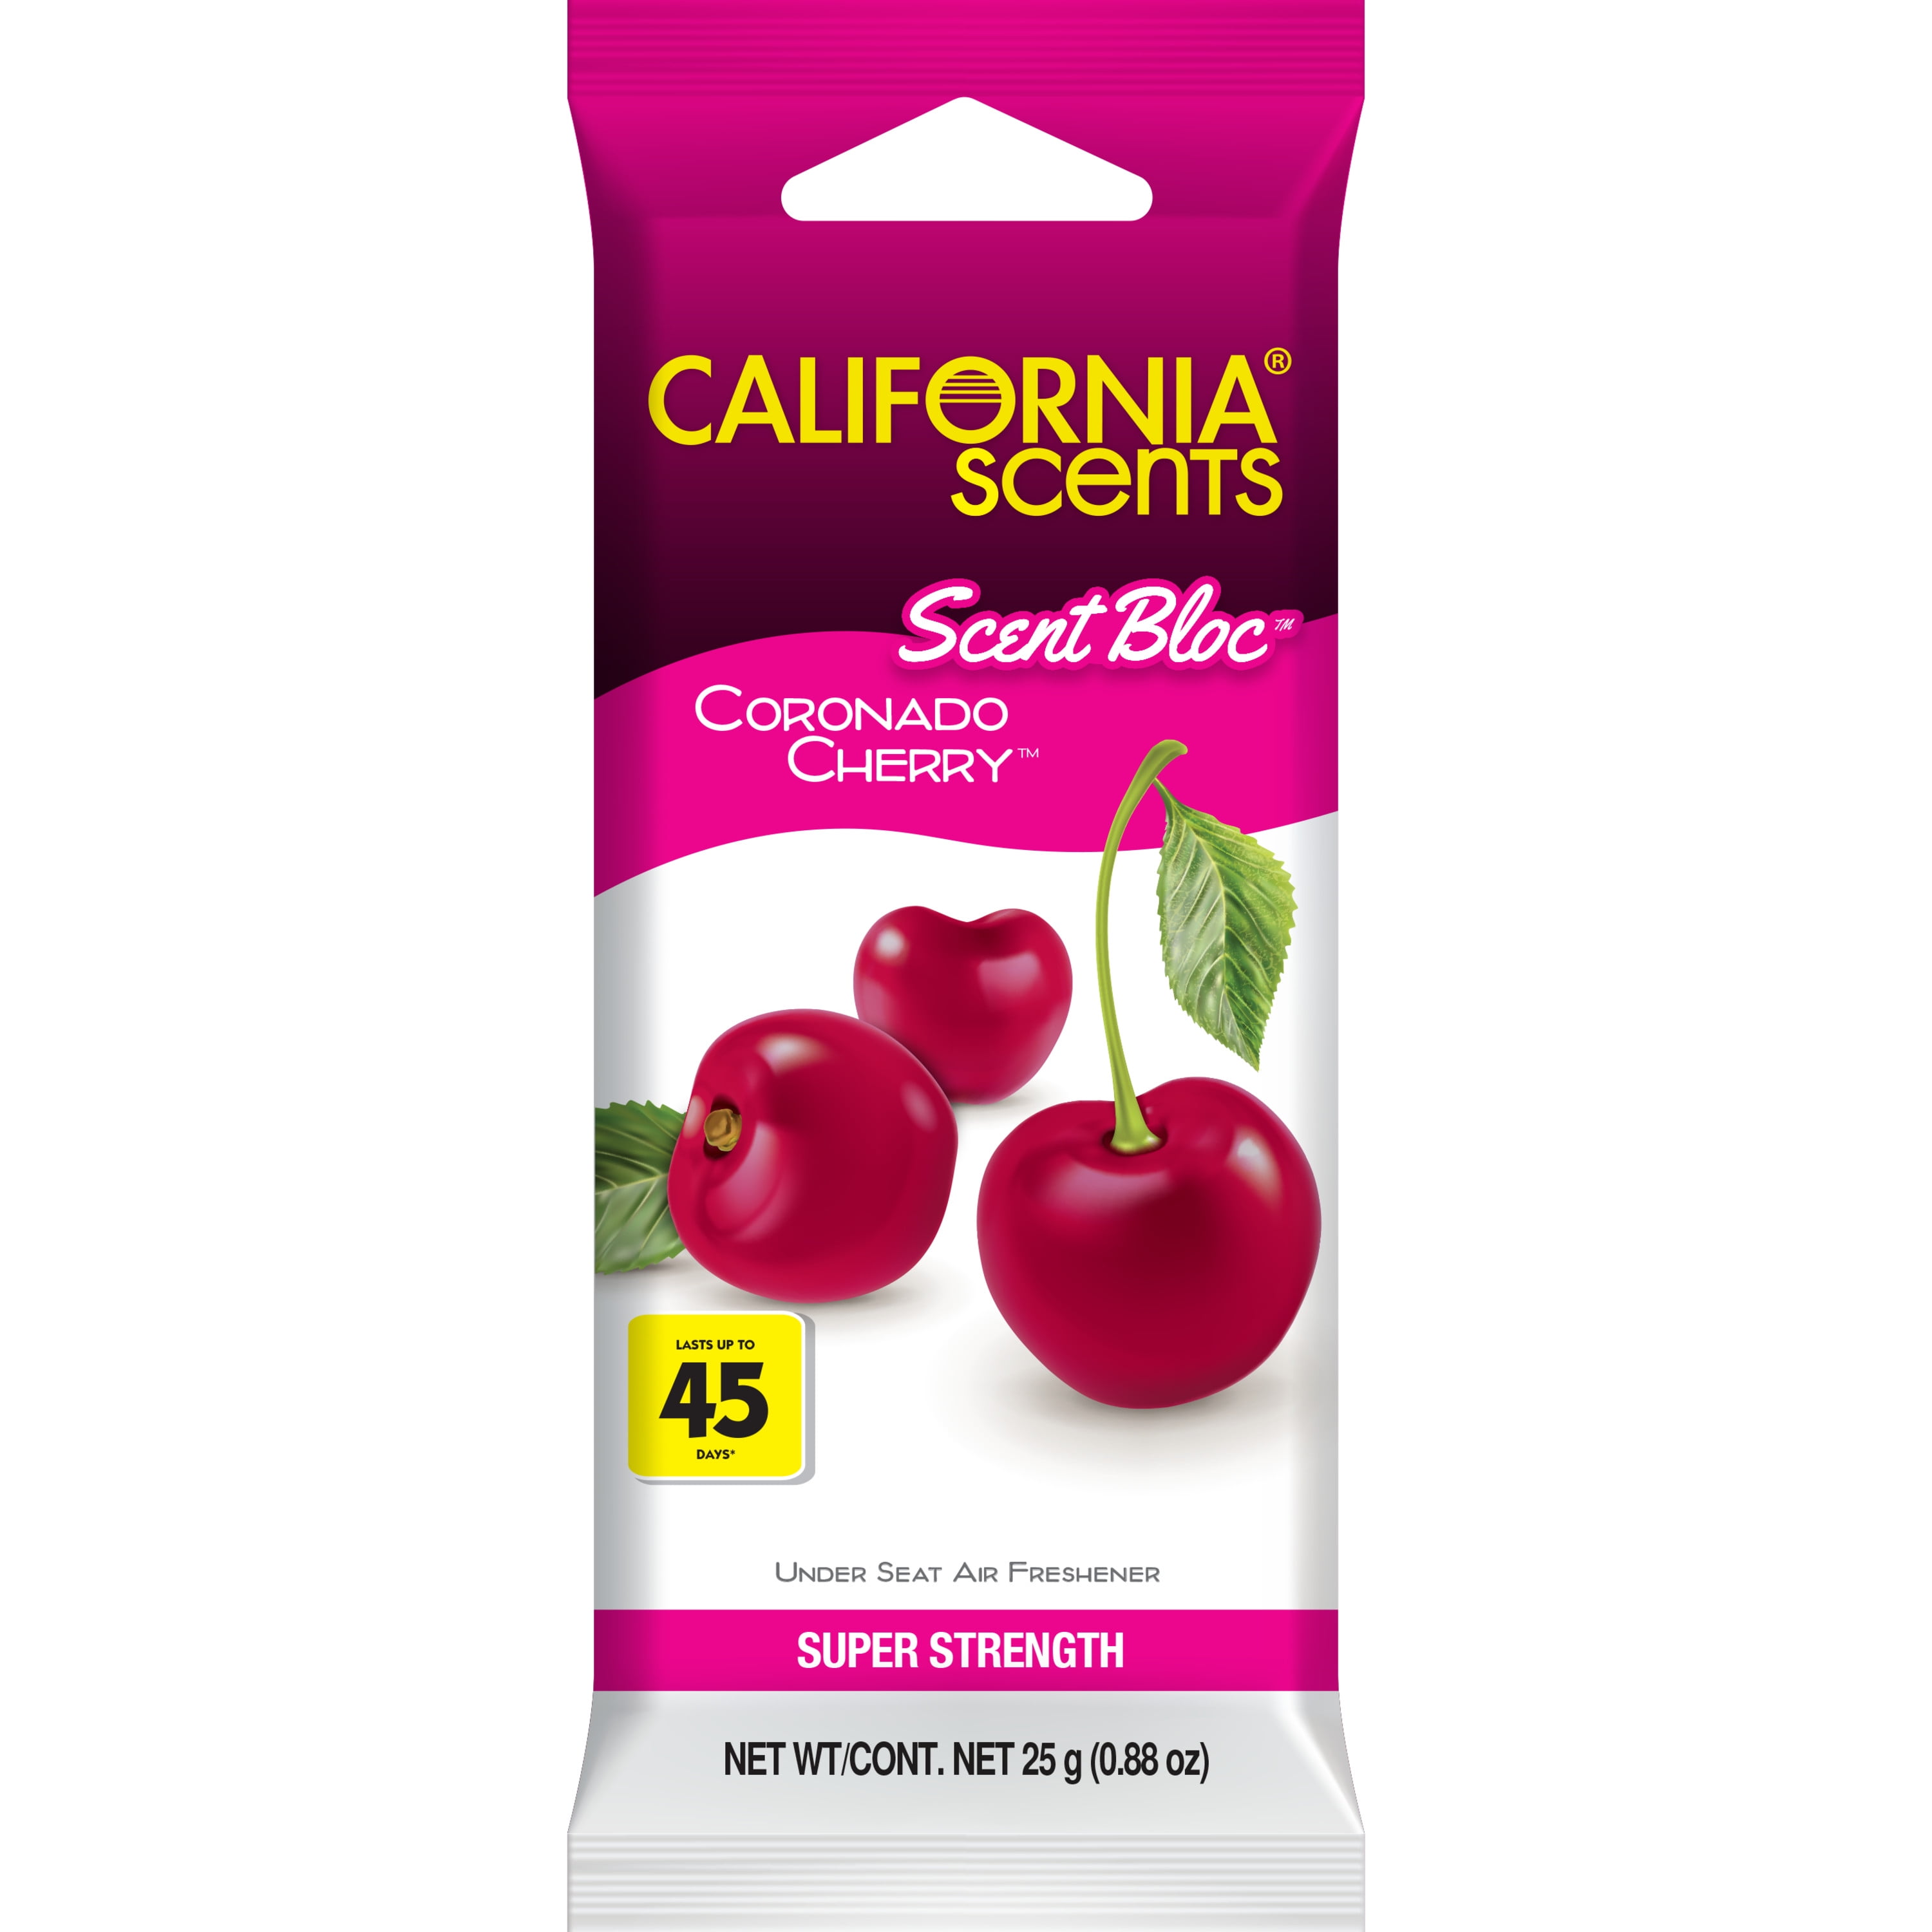  California Scents Car Air Freshener and Odor Neutralizer, Set  of 6 Power Bloc Air Fresheners for Home and Car, Coronado Cherry, Fresh and  Bold, 0.88 Oz Each : Everything Else